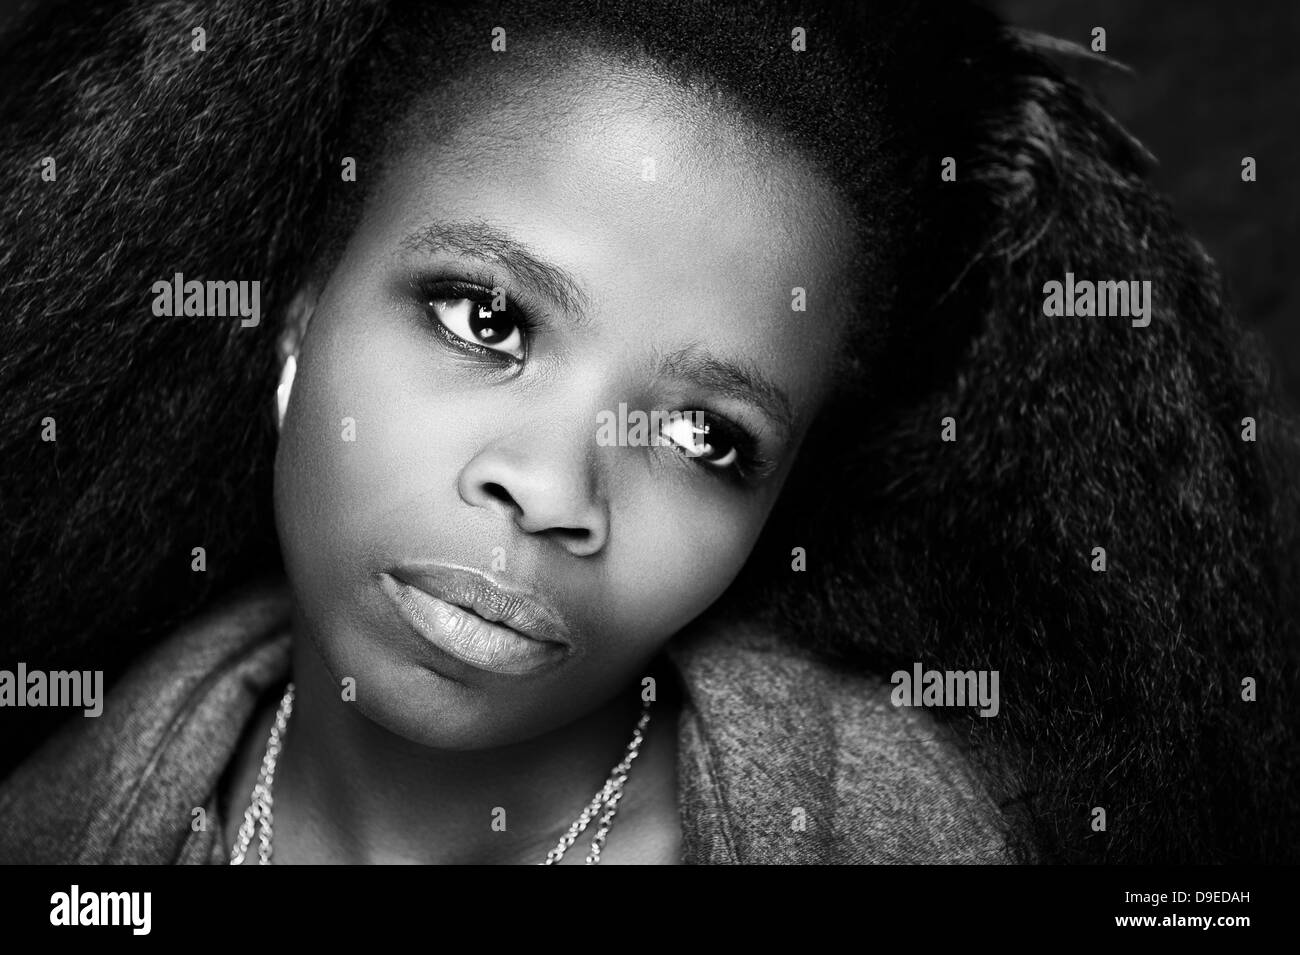 Young African lady with beautiful afro hair, a low key background, black & white studio shot. Dramatic facial expression. Stock Photo